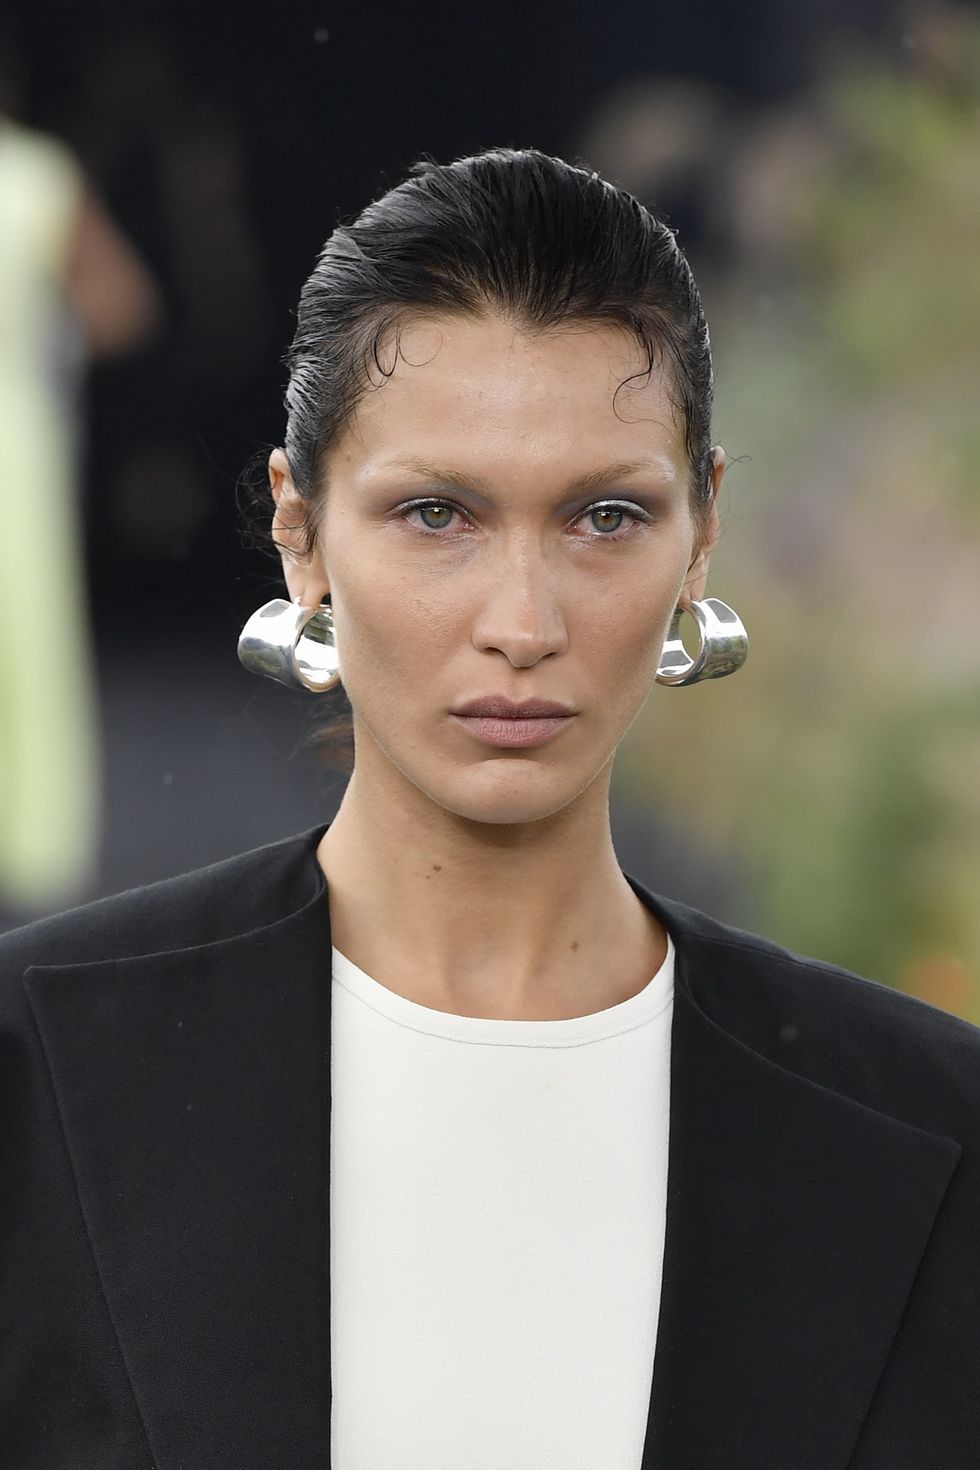 What Are the Spring 2023 Jewelry Trends? See What Made the Cut